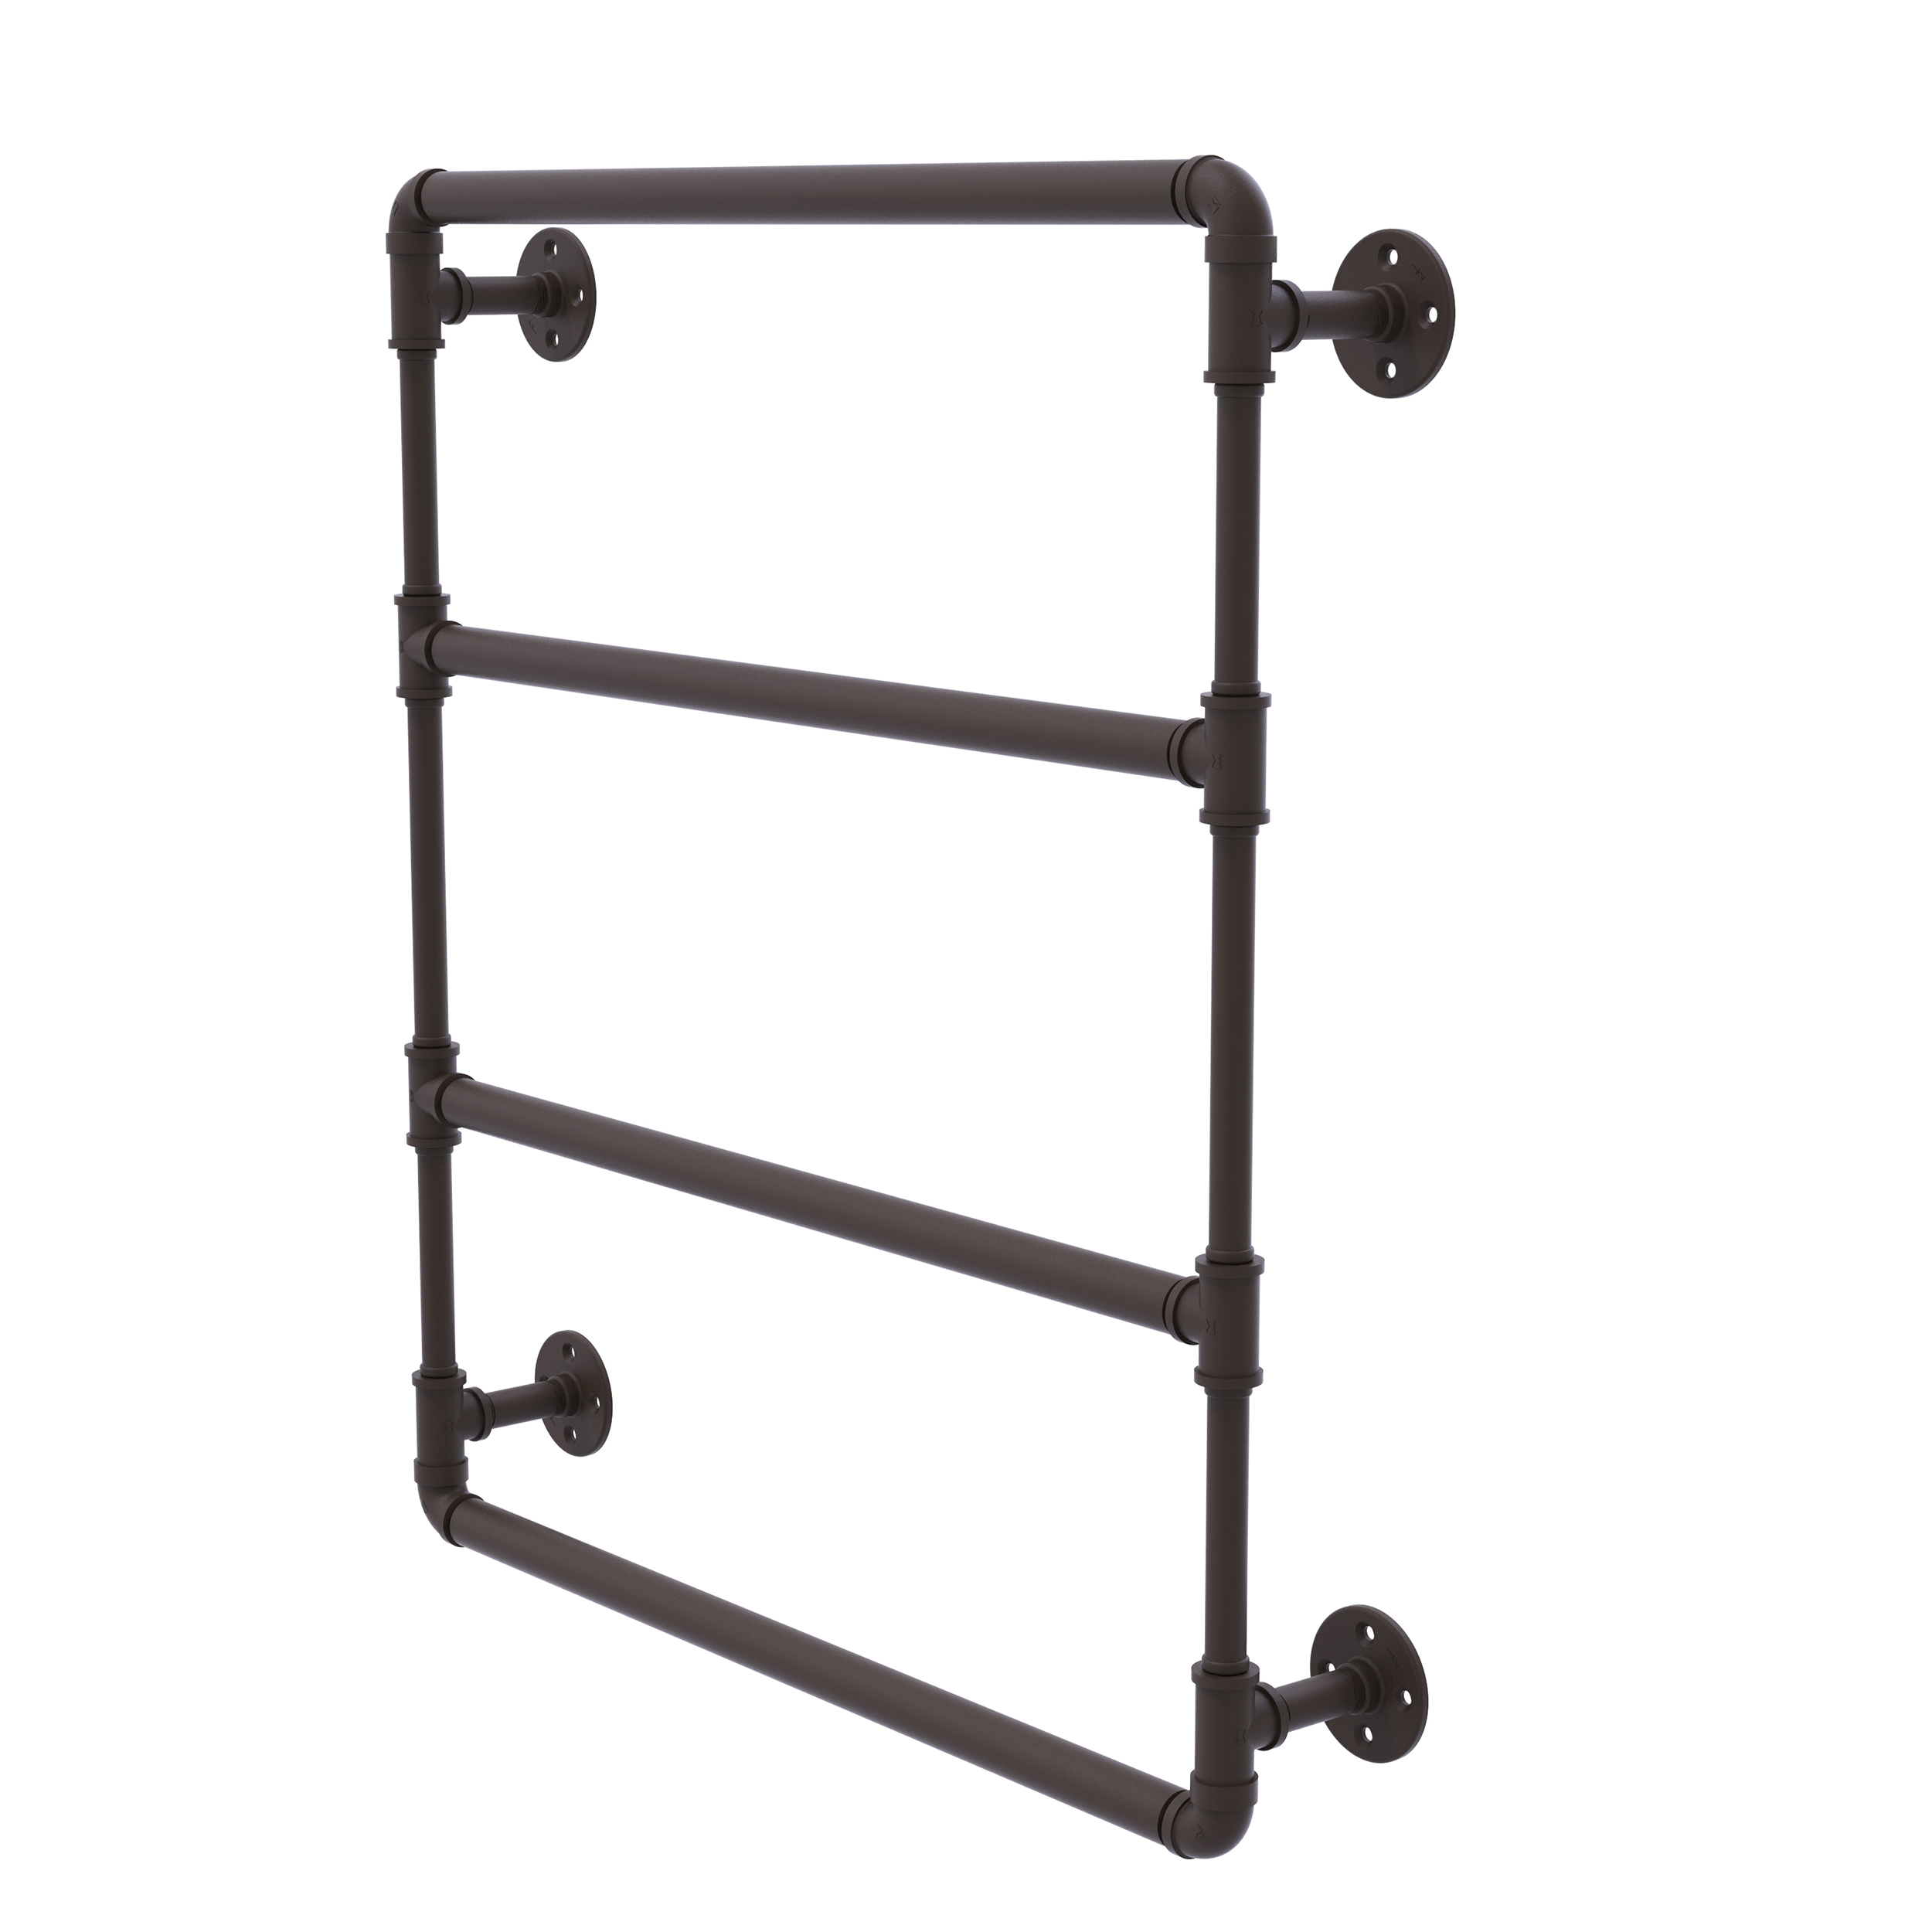 36" Wall Mounted Ladder Towel Bar, Oil Rubbed Bronze Finish